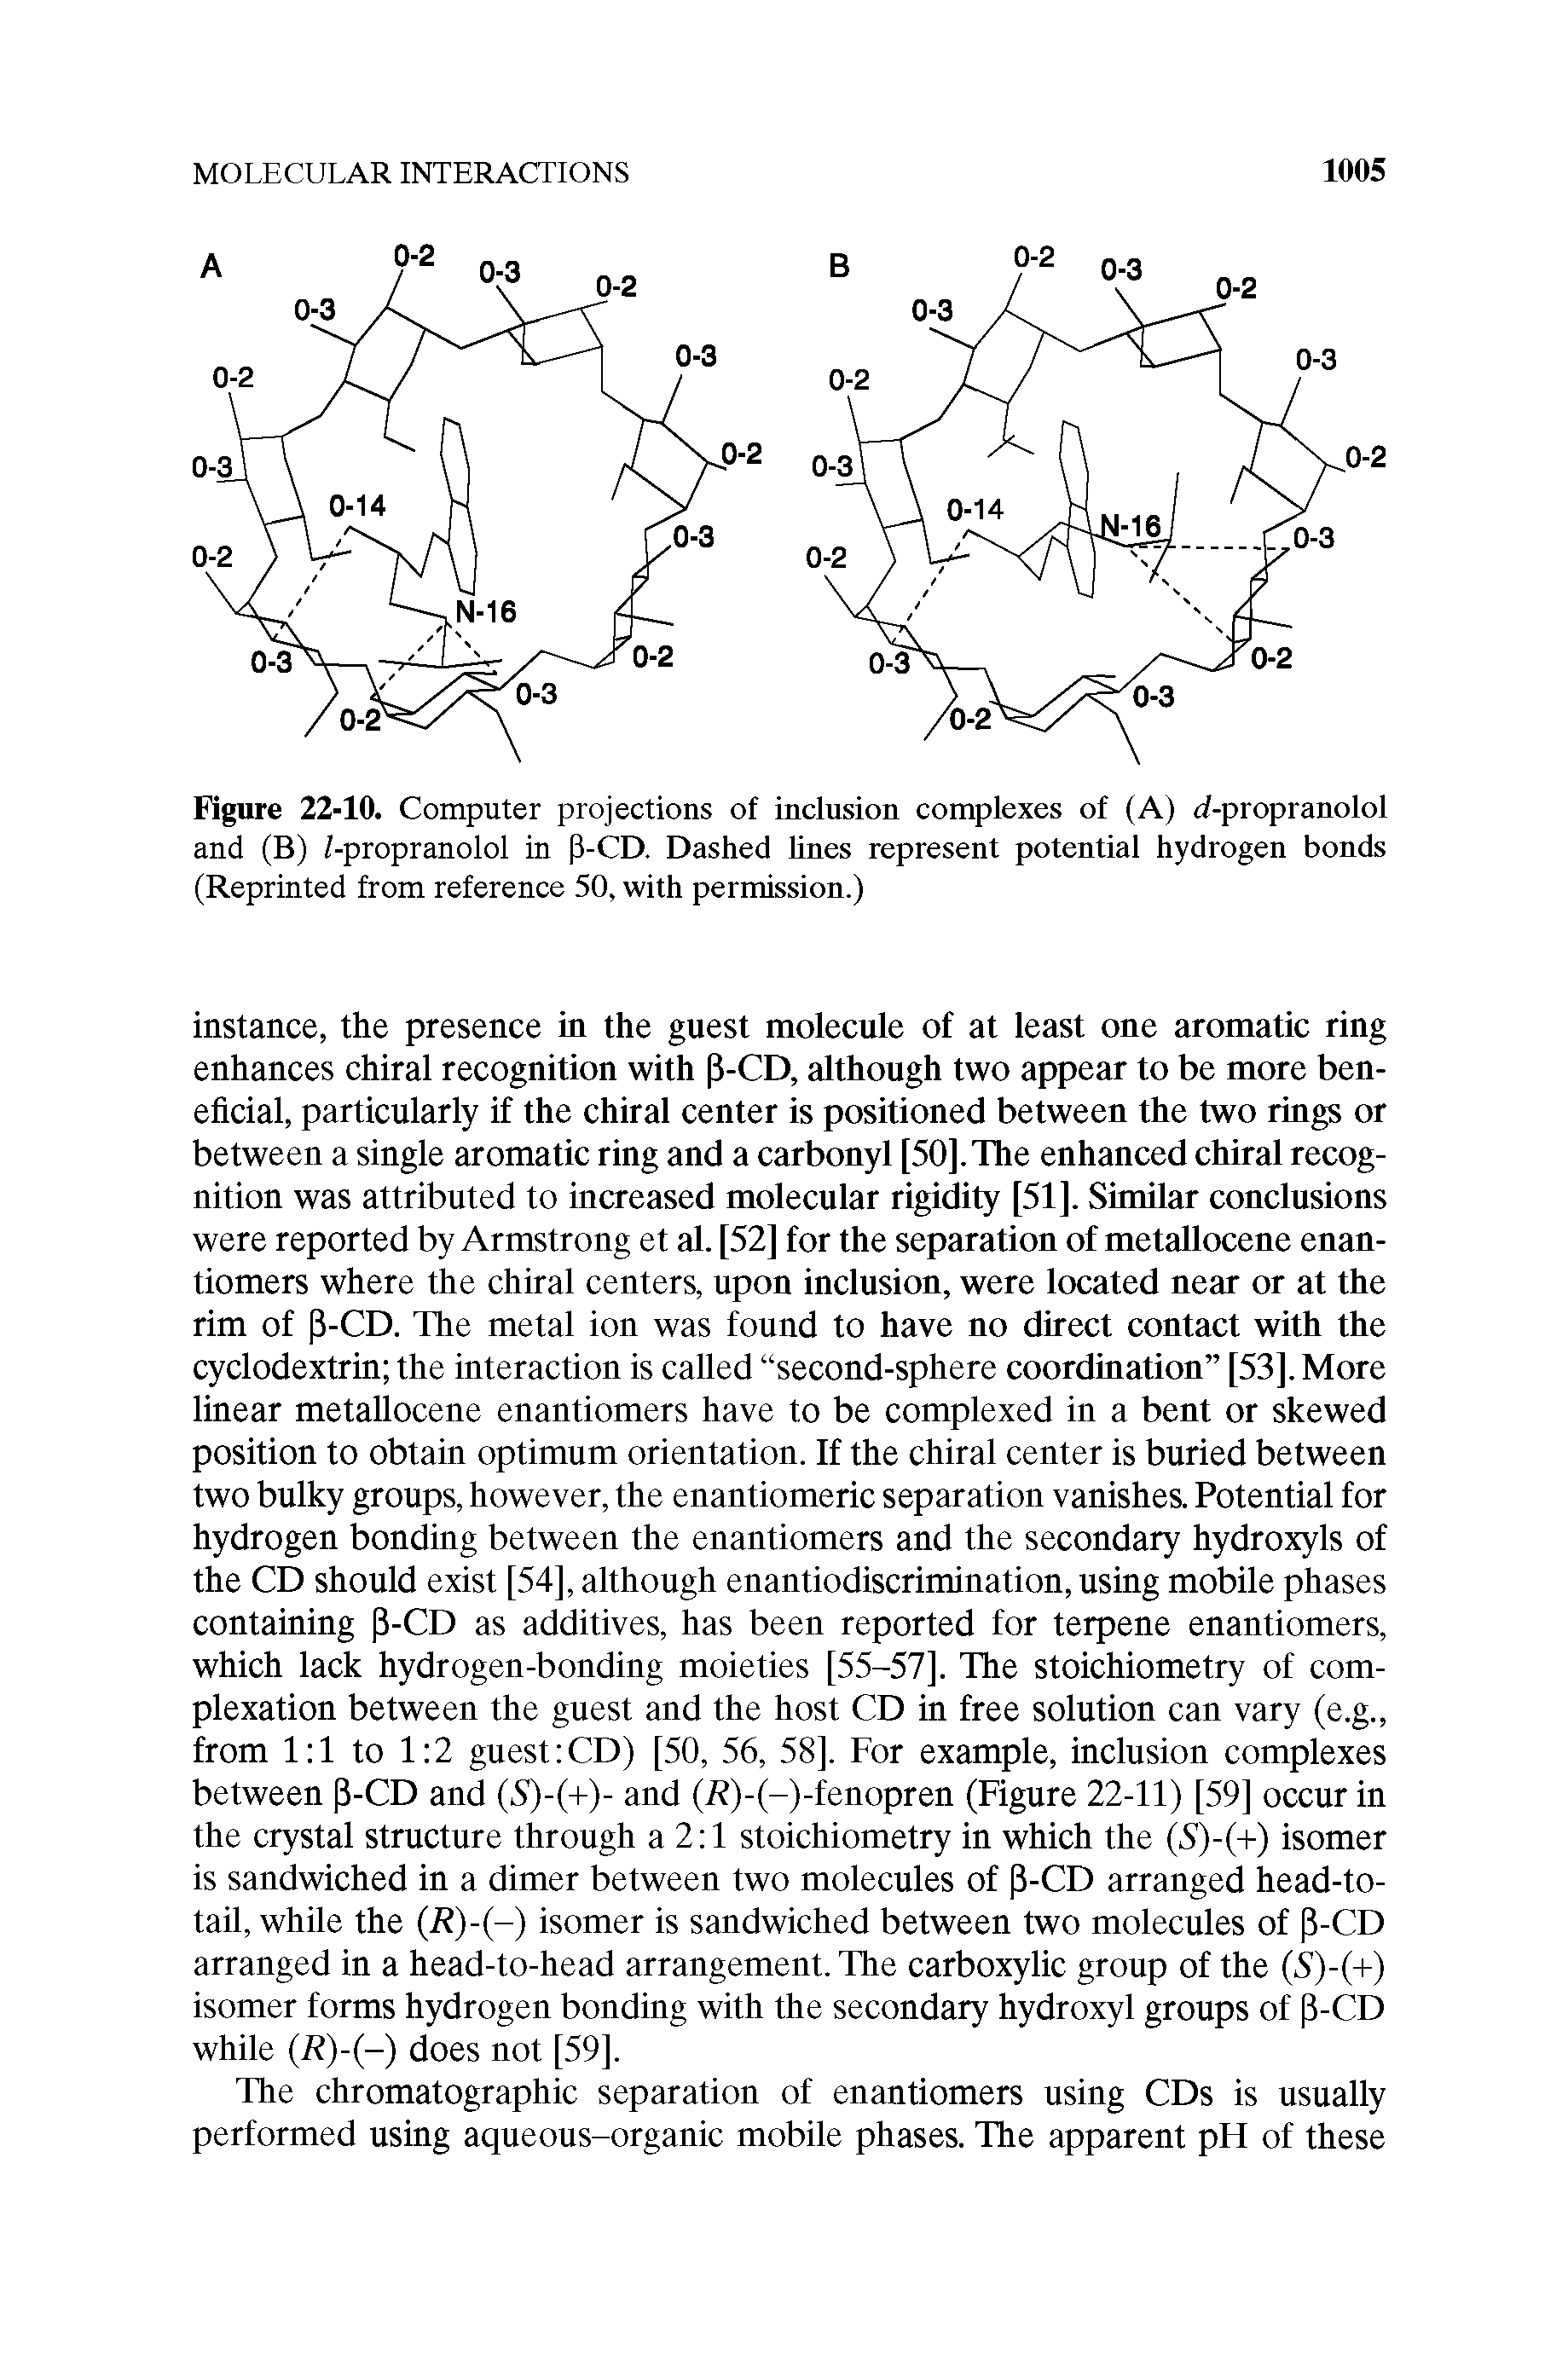 Figure 22-10. Computer projections of inclusion complexes of (A) d-propranolol and (B) Z-propranolol in (l-CD. Dashed lines represent potential hydrogen bonds (Reprinted from reference 50, with permission.)...